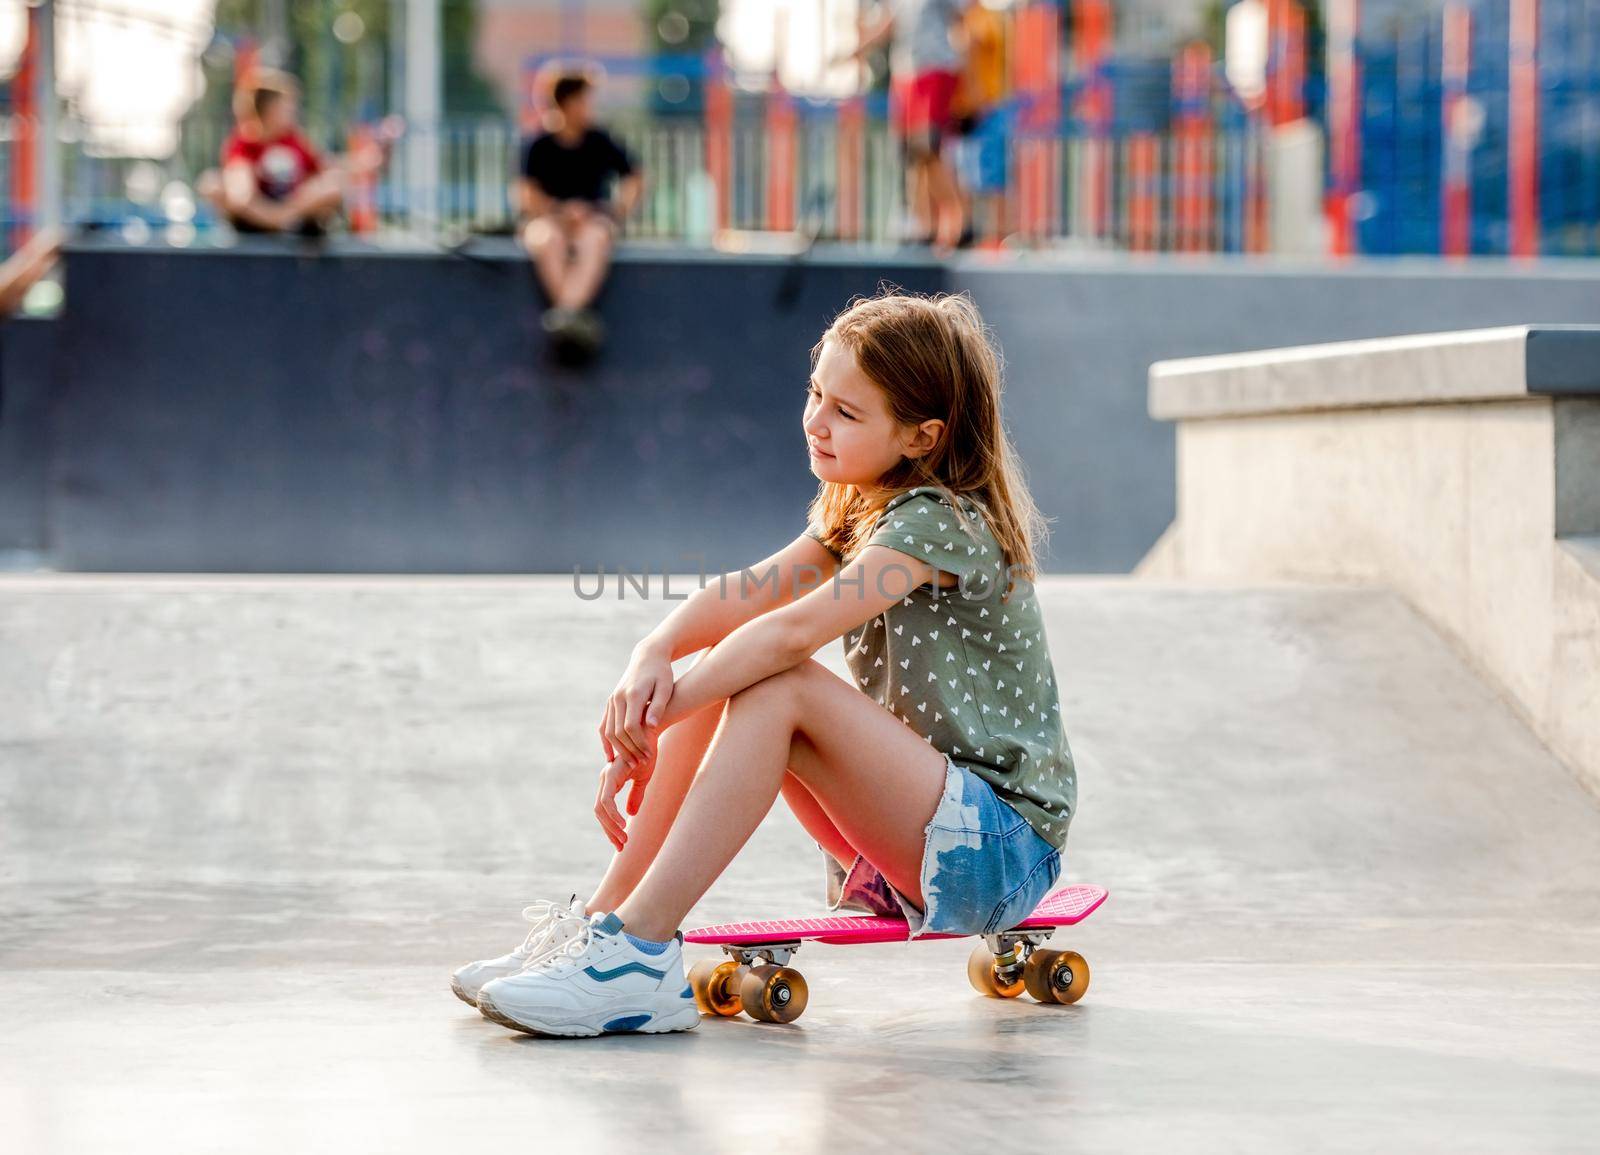 Preteen girl sitting on skateboard outdoors and looking back. Female skater child close to city riding ramp